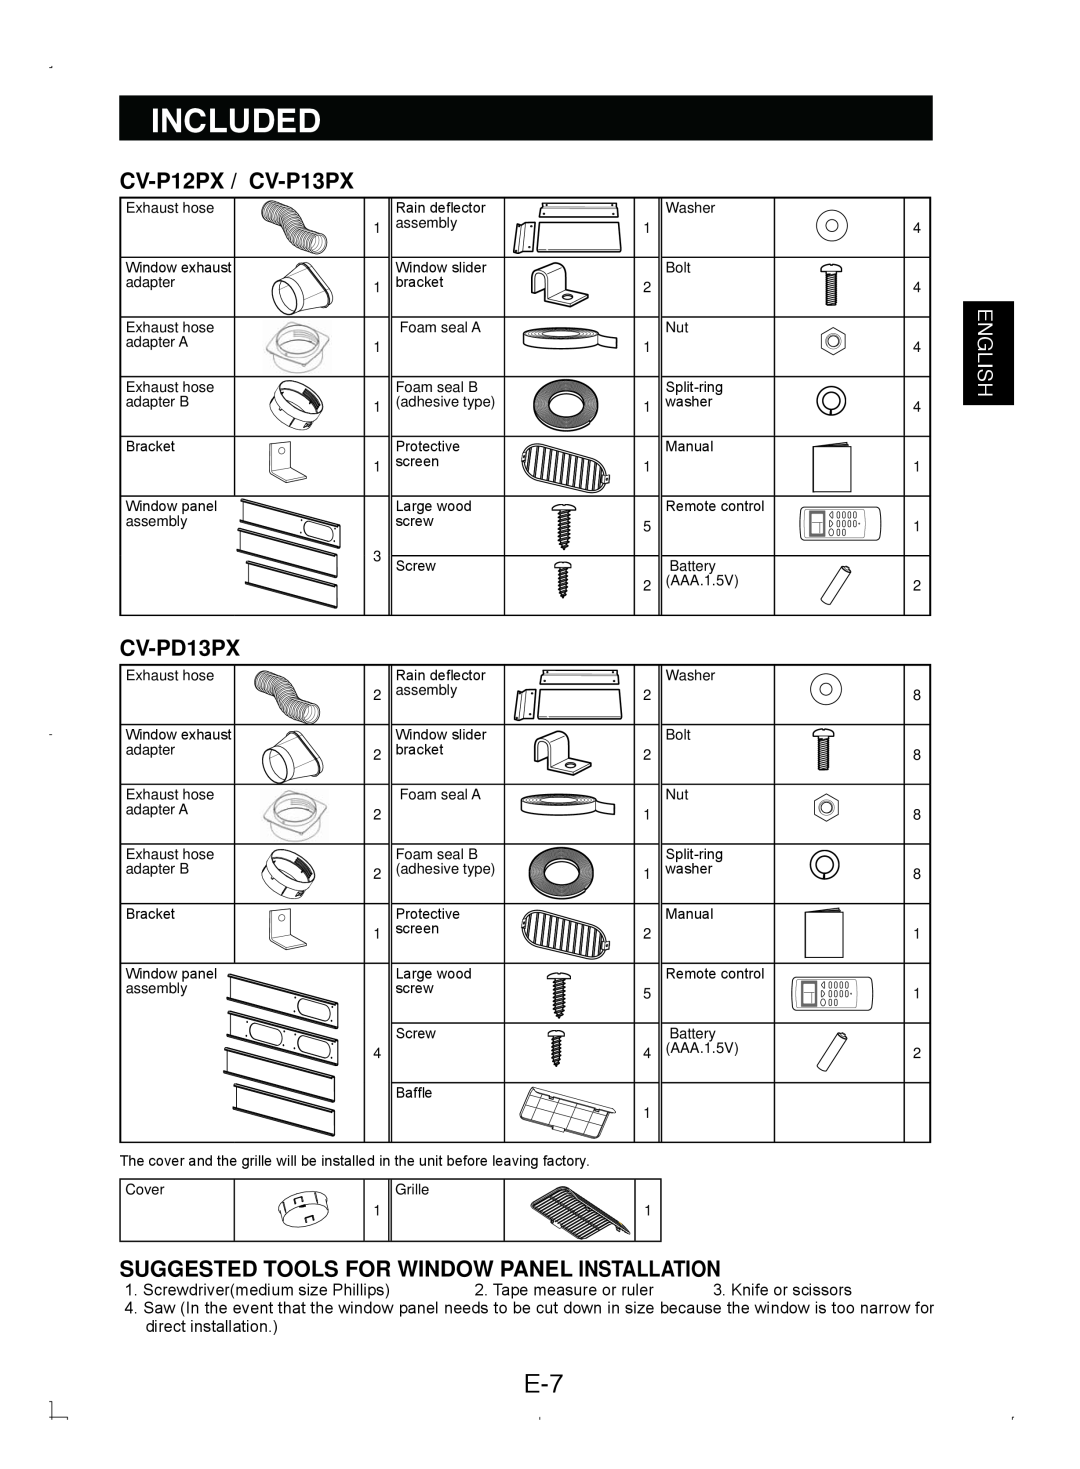 Sony operation manual Included, CV-P12PX / CV-P13PX, CV-PD13PX, Suggested Tools For Window Panel Installation, English 